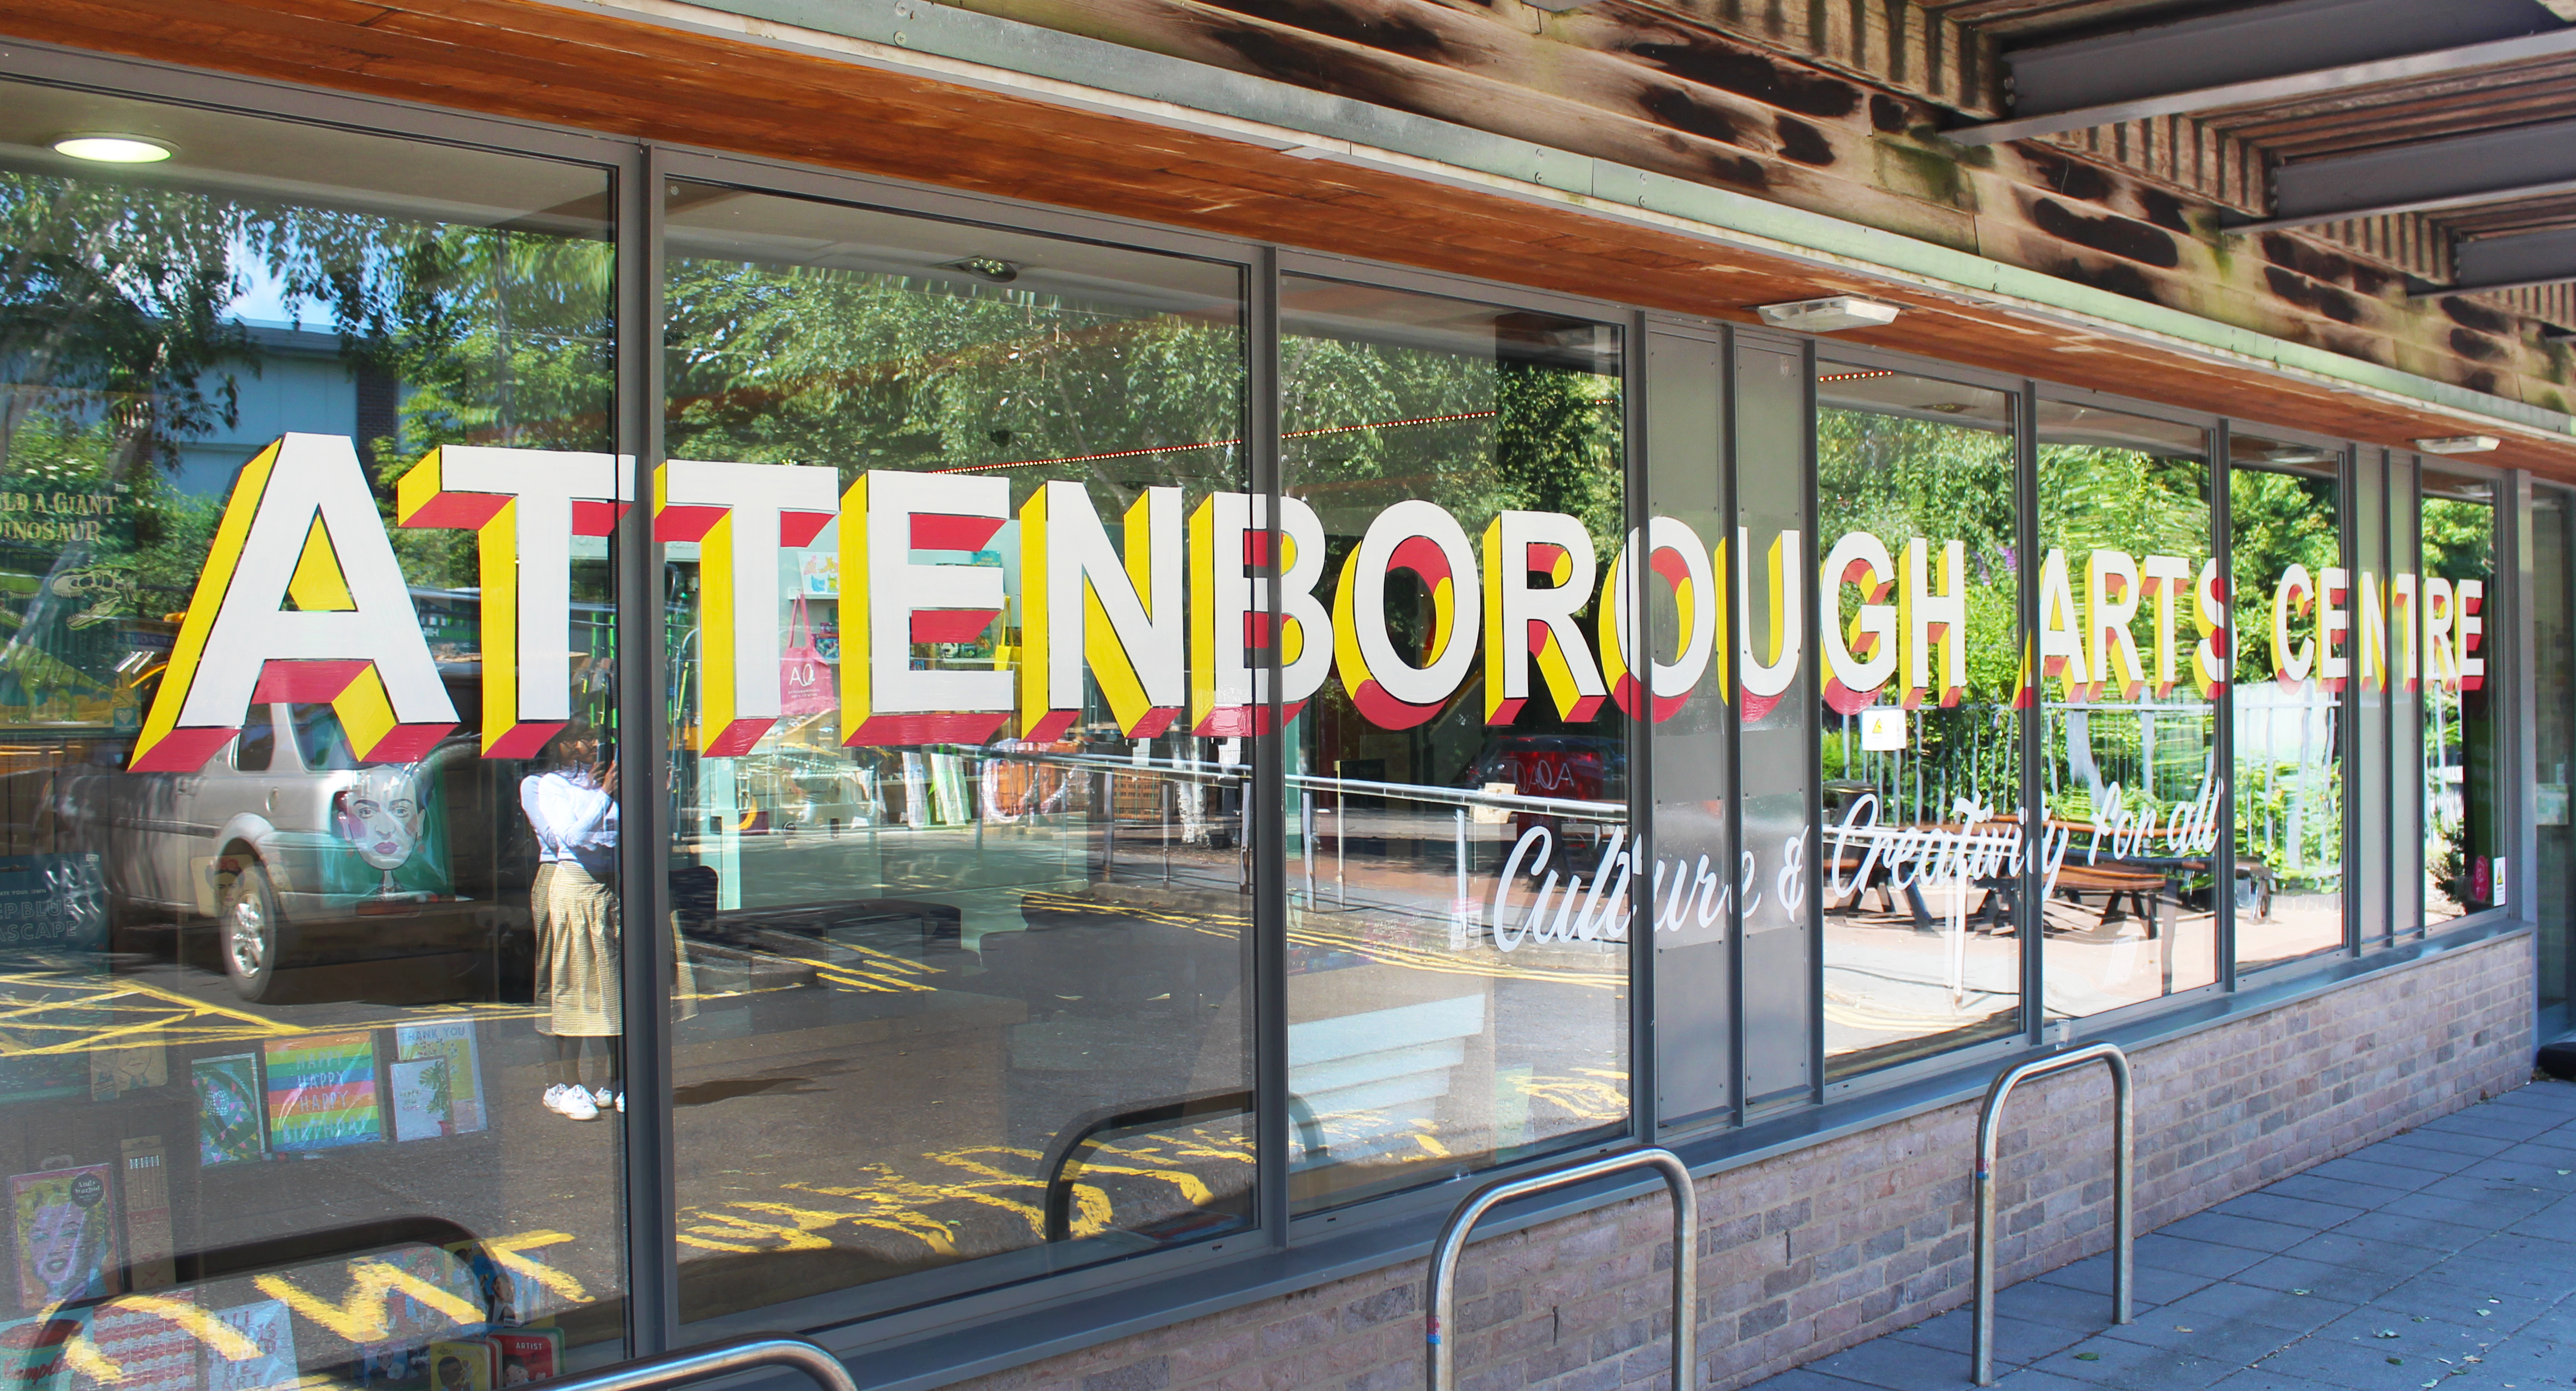 The front windows of Attenborough Arts Centre with sign writing saying 'Attenborough Arts Centre, Culture & Creativity for all'.